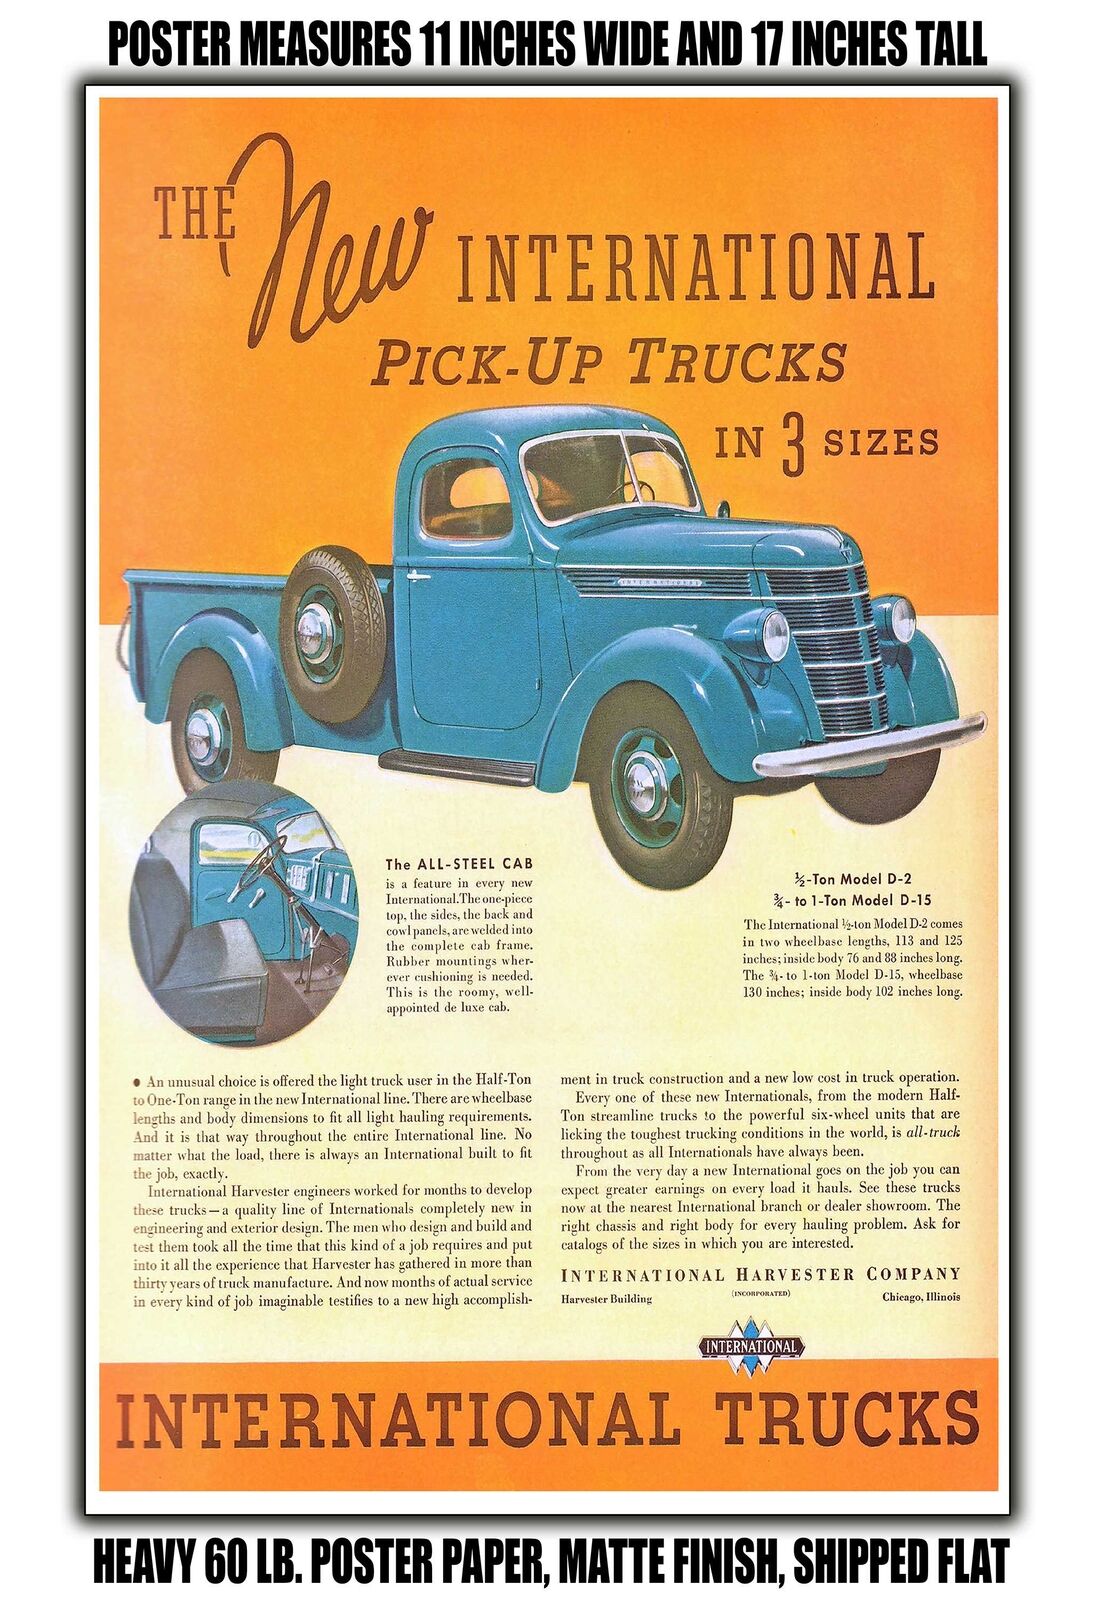 11x17 POSTER - 1937 International Pickup Truck in 3 Sizes